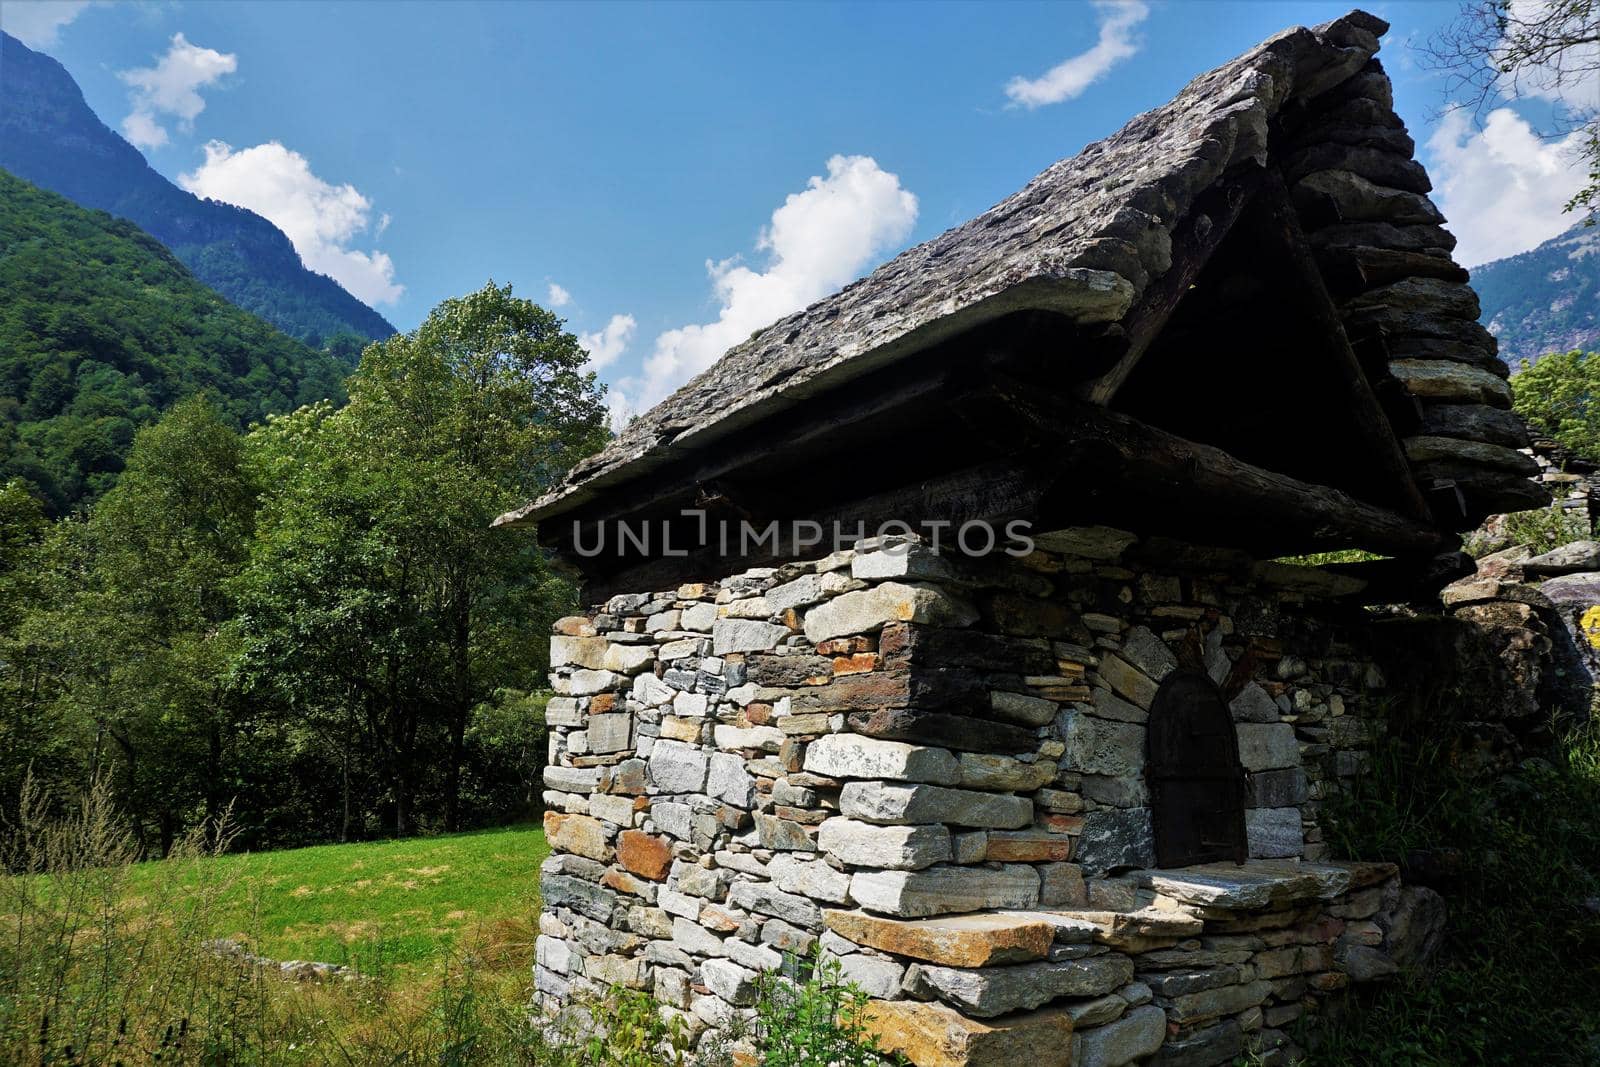 Old bakehouse spotted in the Verzasca valley, Ticino, Switzerland